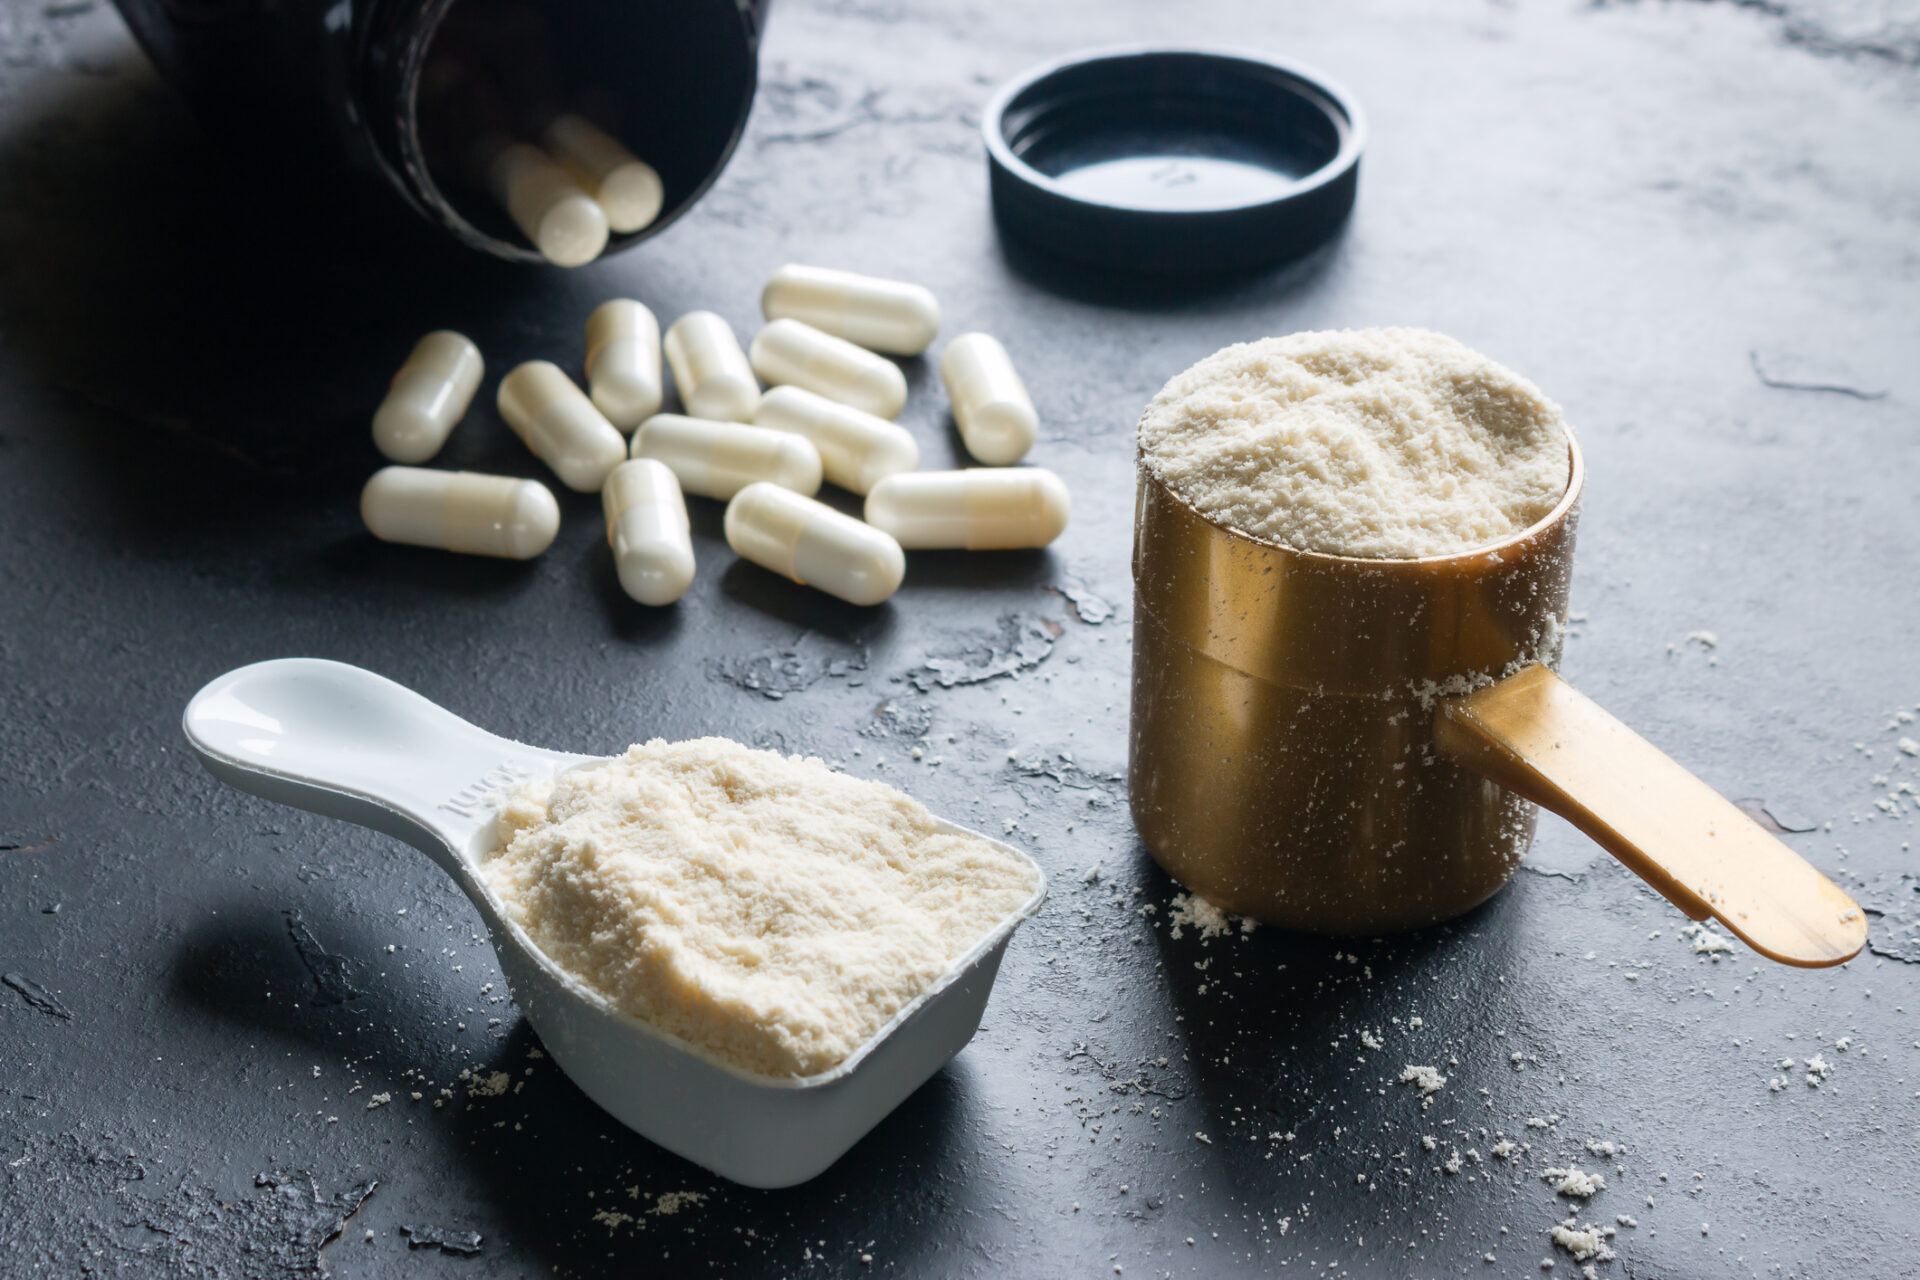 Whey Protein Products Market